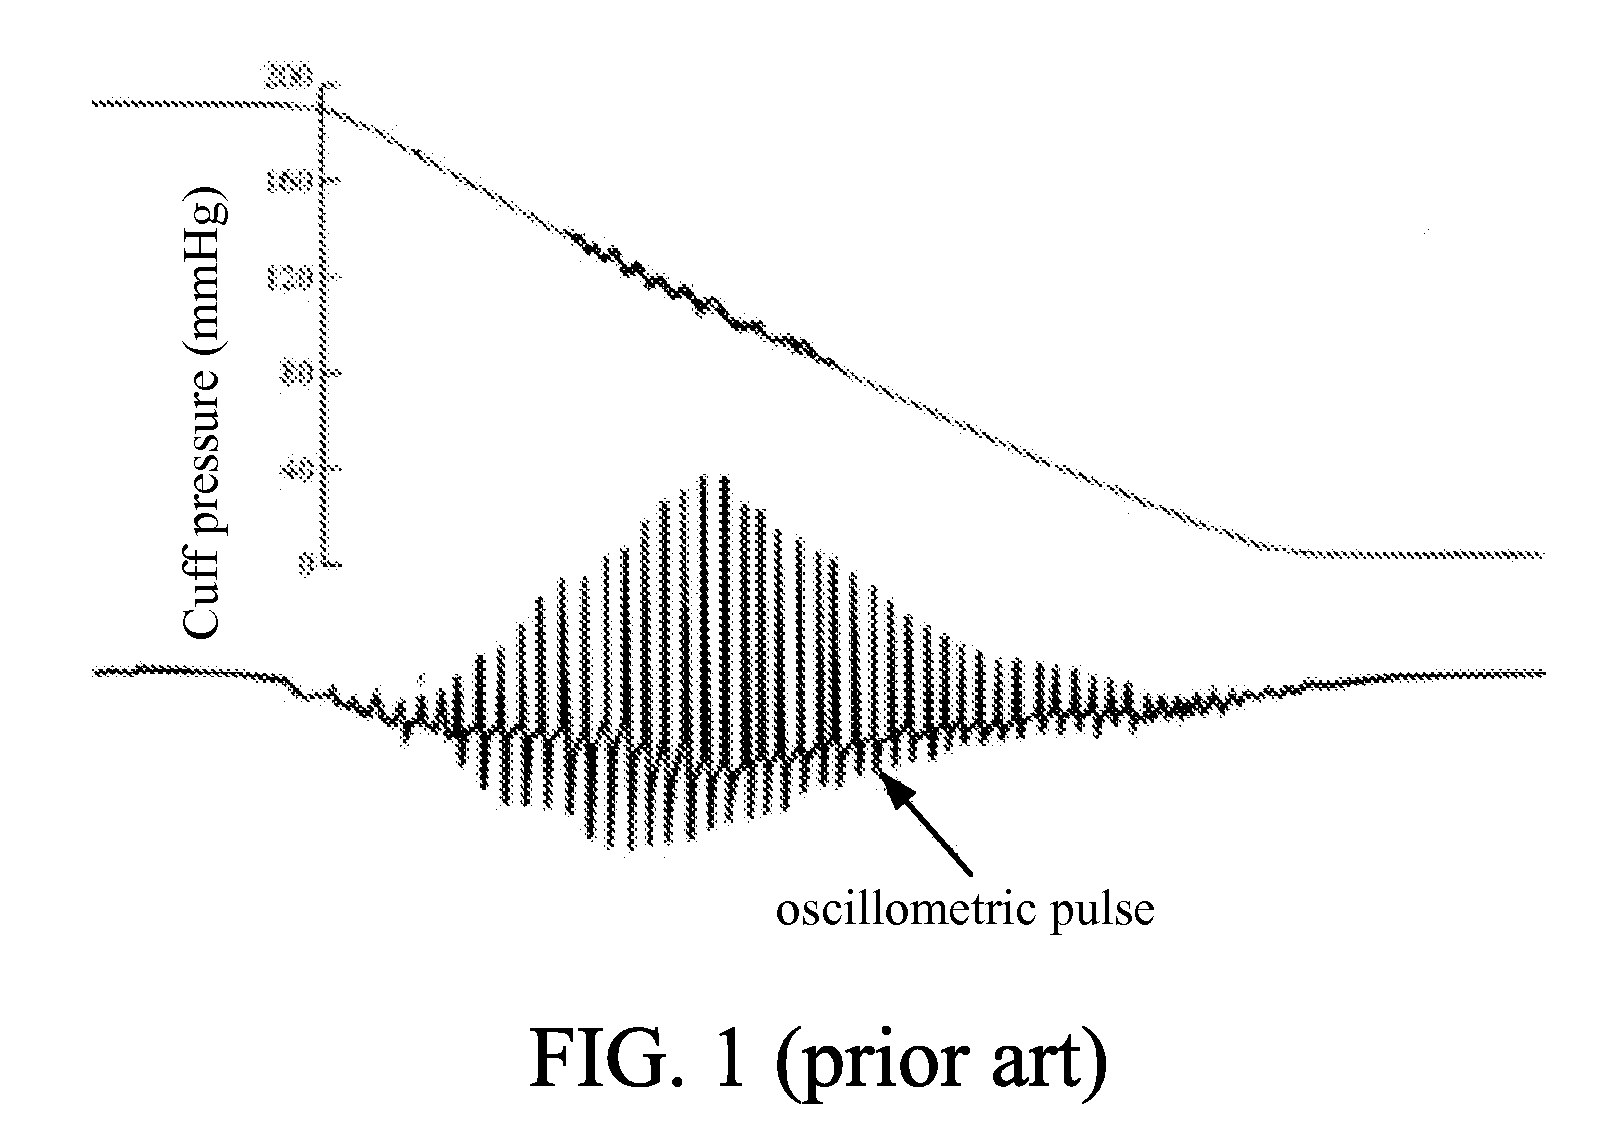 Apparatus and method for measuring blood pressure with motion artifacts elimination